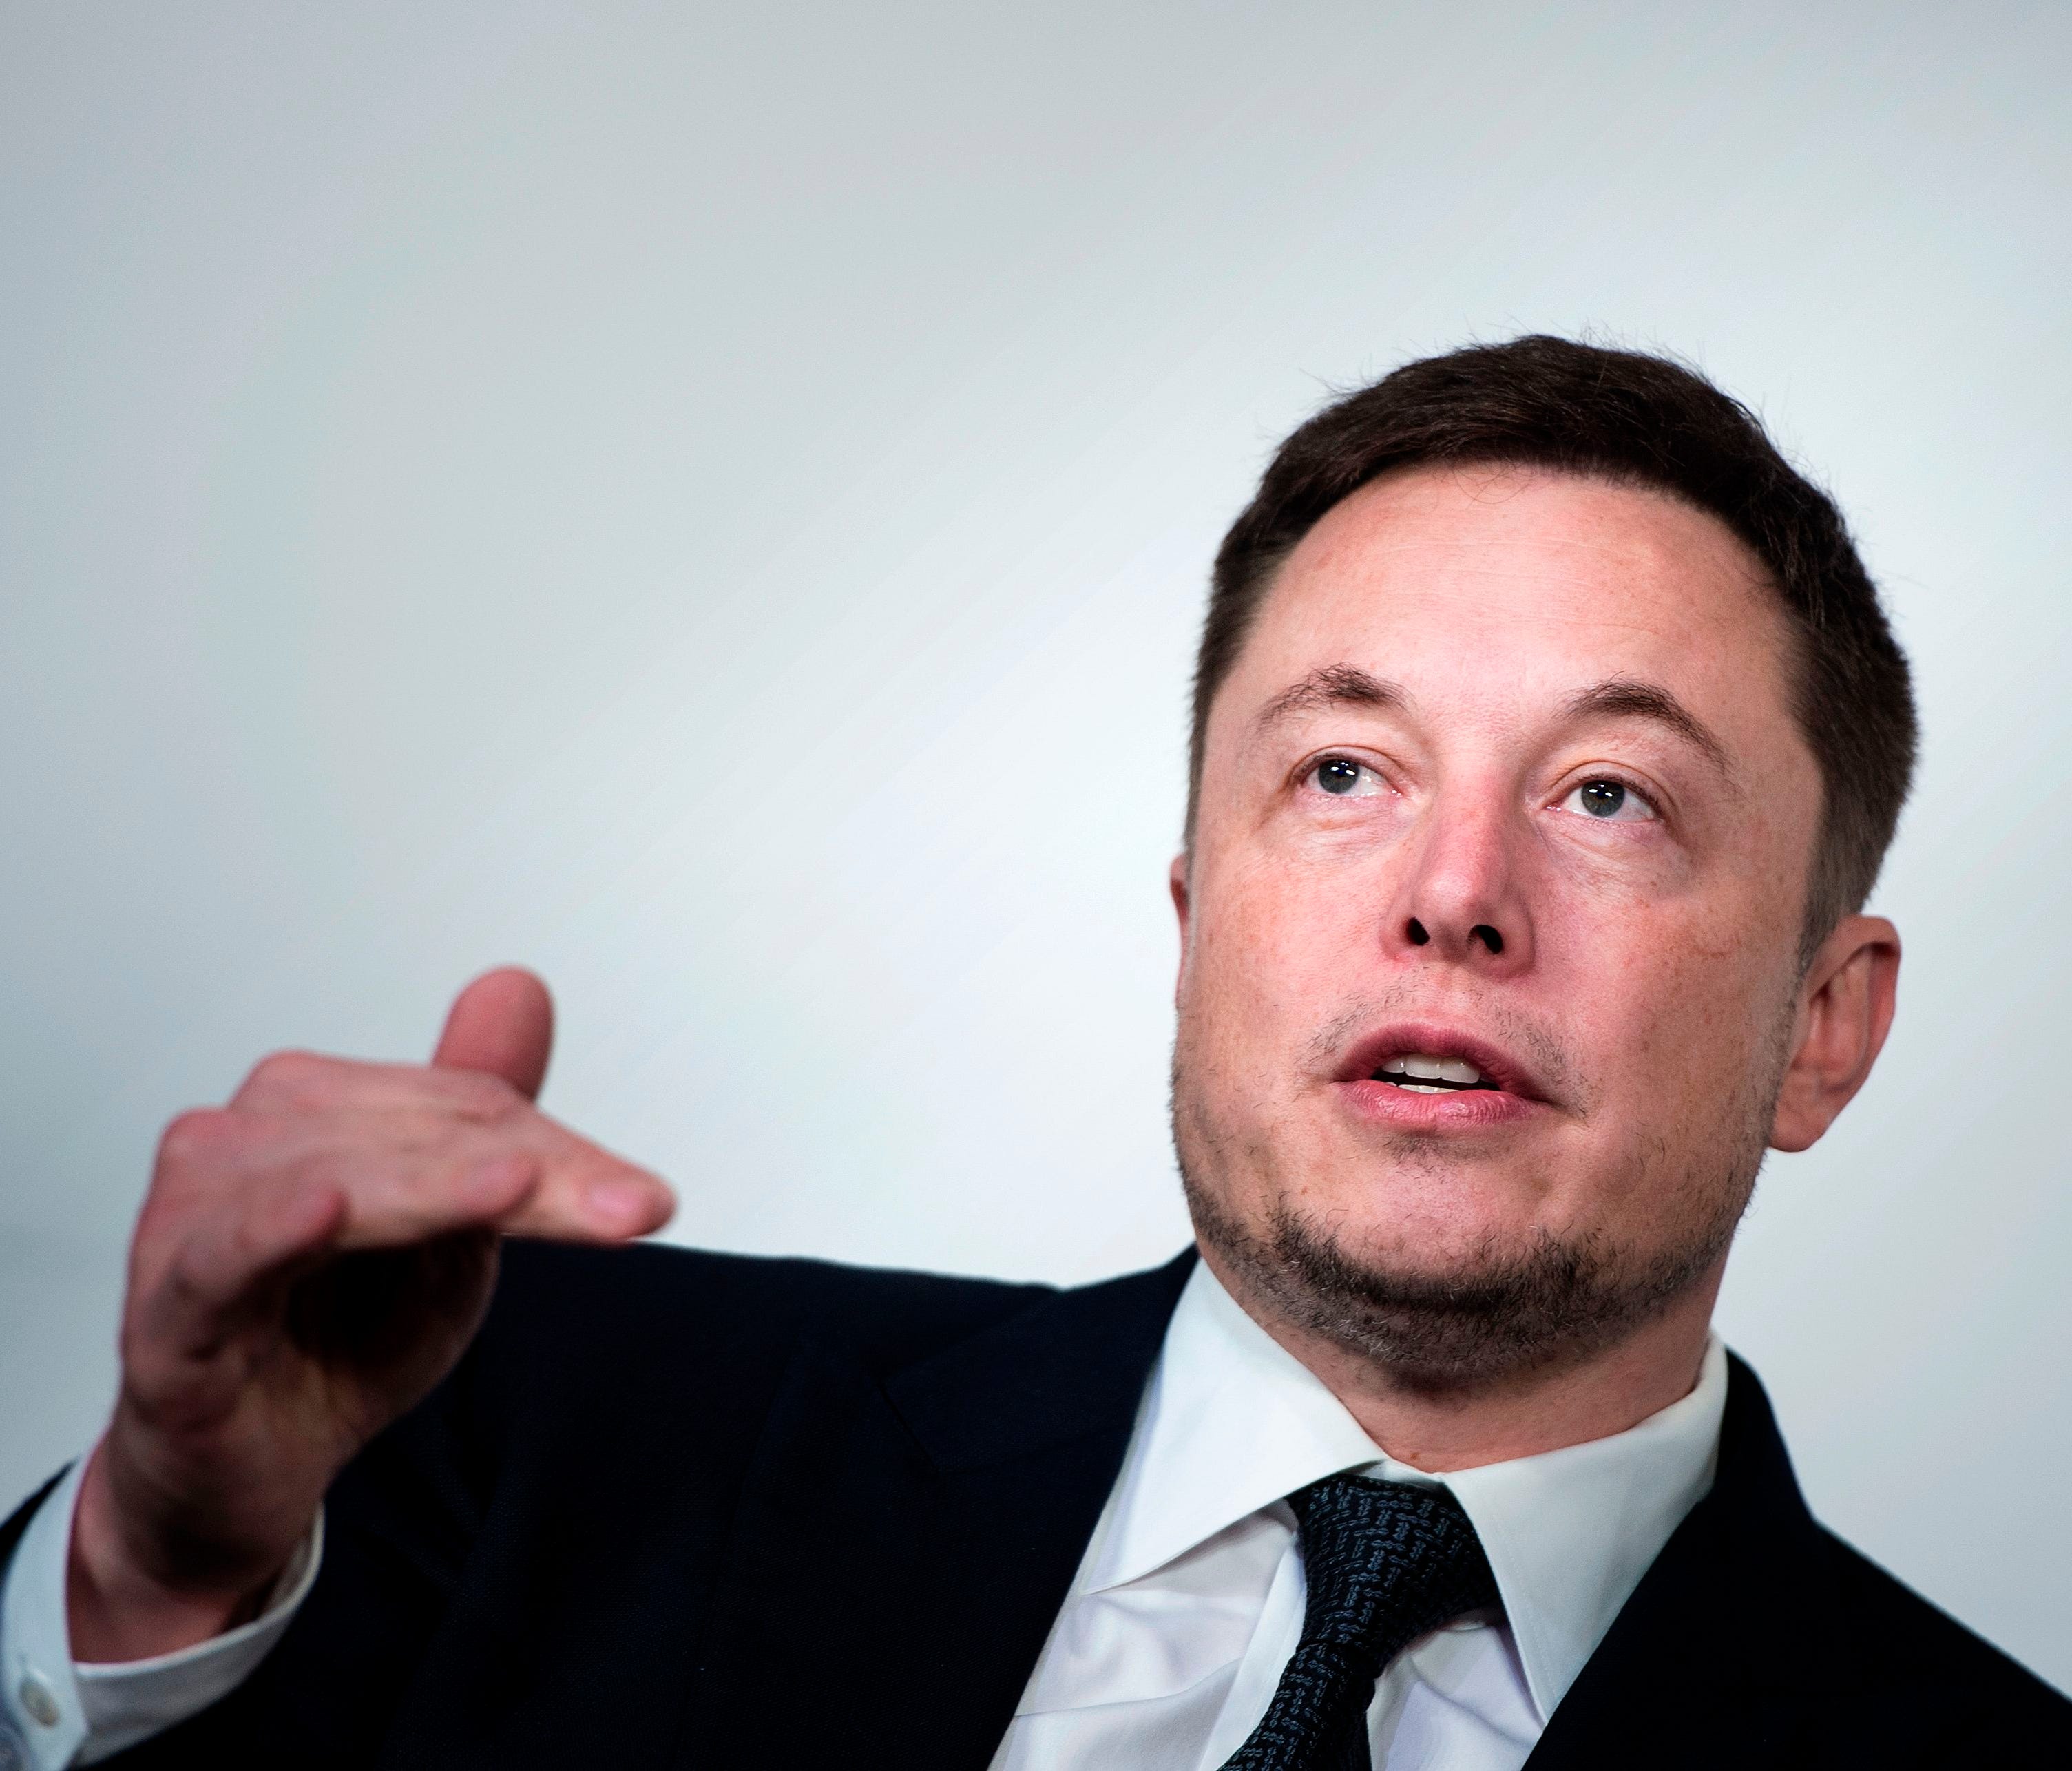 This file photo taken on July 19, 2017 shows Elon Musk, CEO of SpaceX and Tesla,  during the International Space Station Research and Development Conference at the Omni Shoreham Hotel in Washington, DC. US entrepreneur Elon Musk said on July 20, 2017